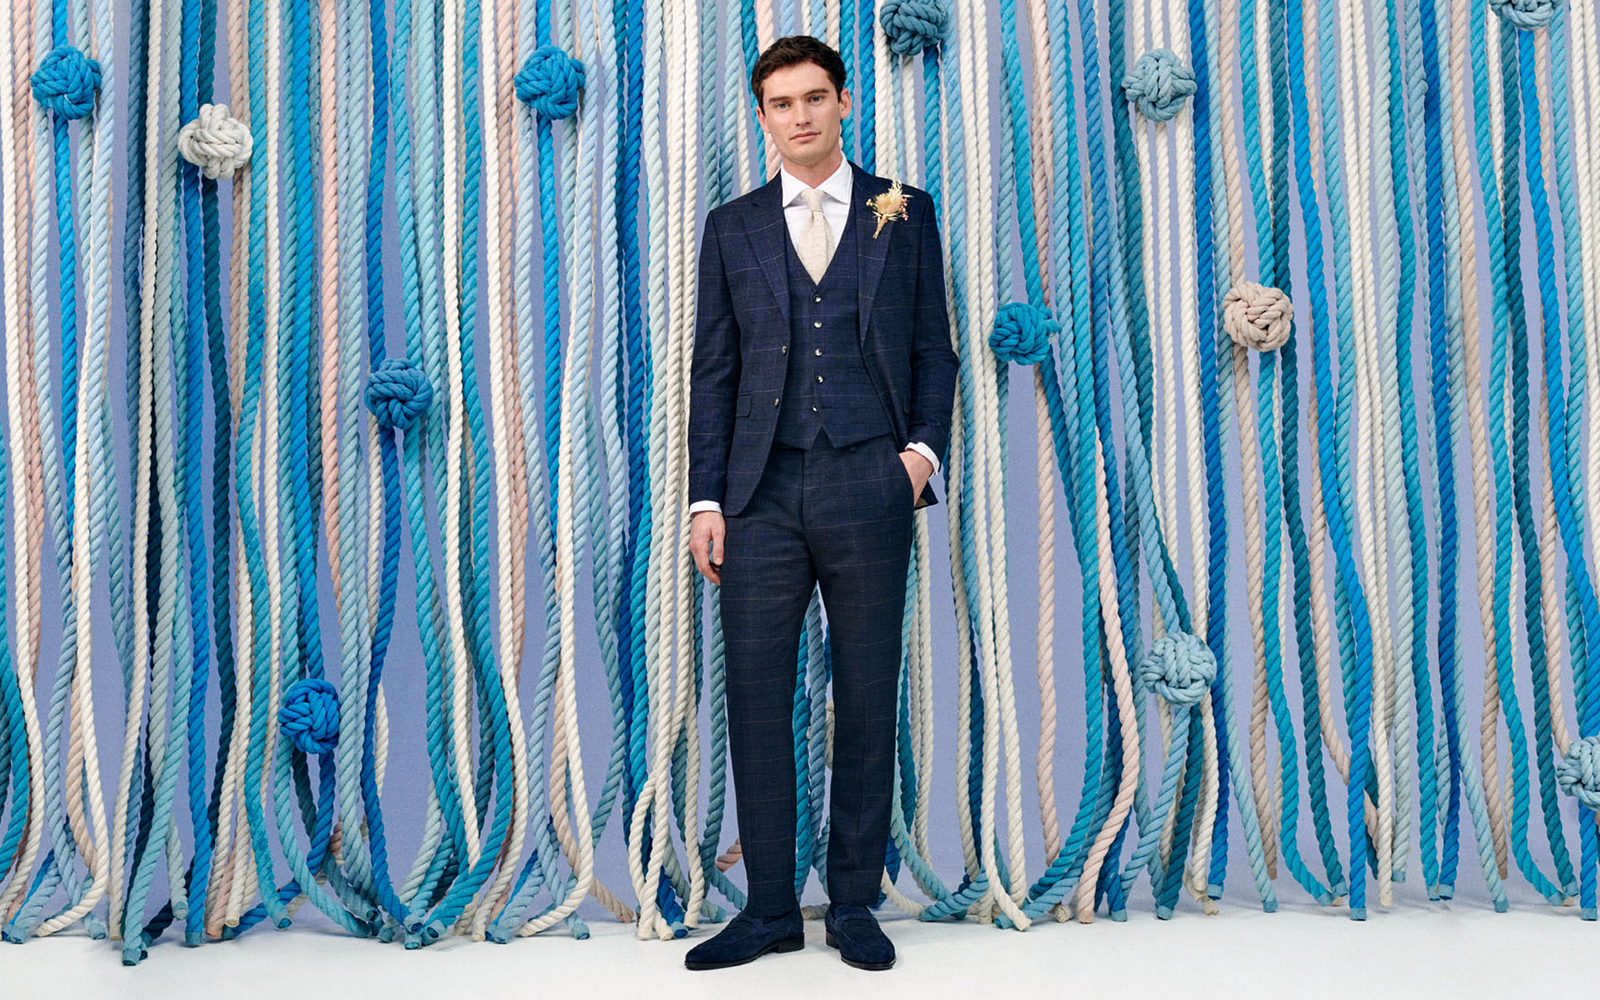 Groom in Moss Bros checked navy three piece suit and gold tie. A modern groom's outfit recommended for a groom opting for a contemporary look.